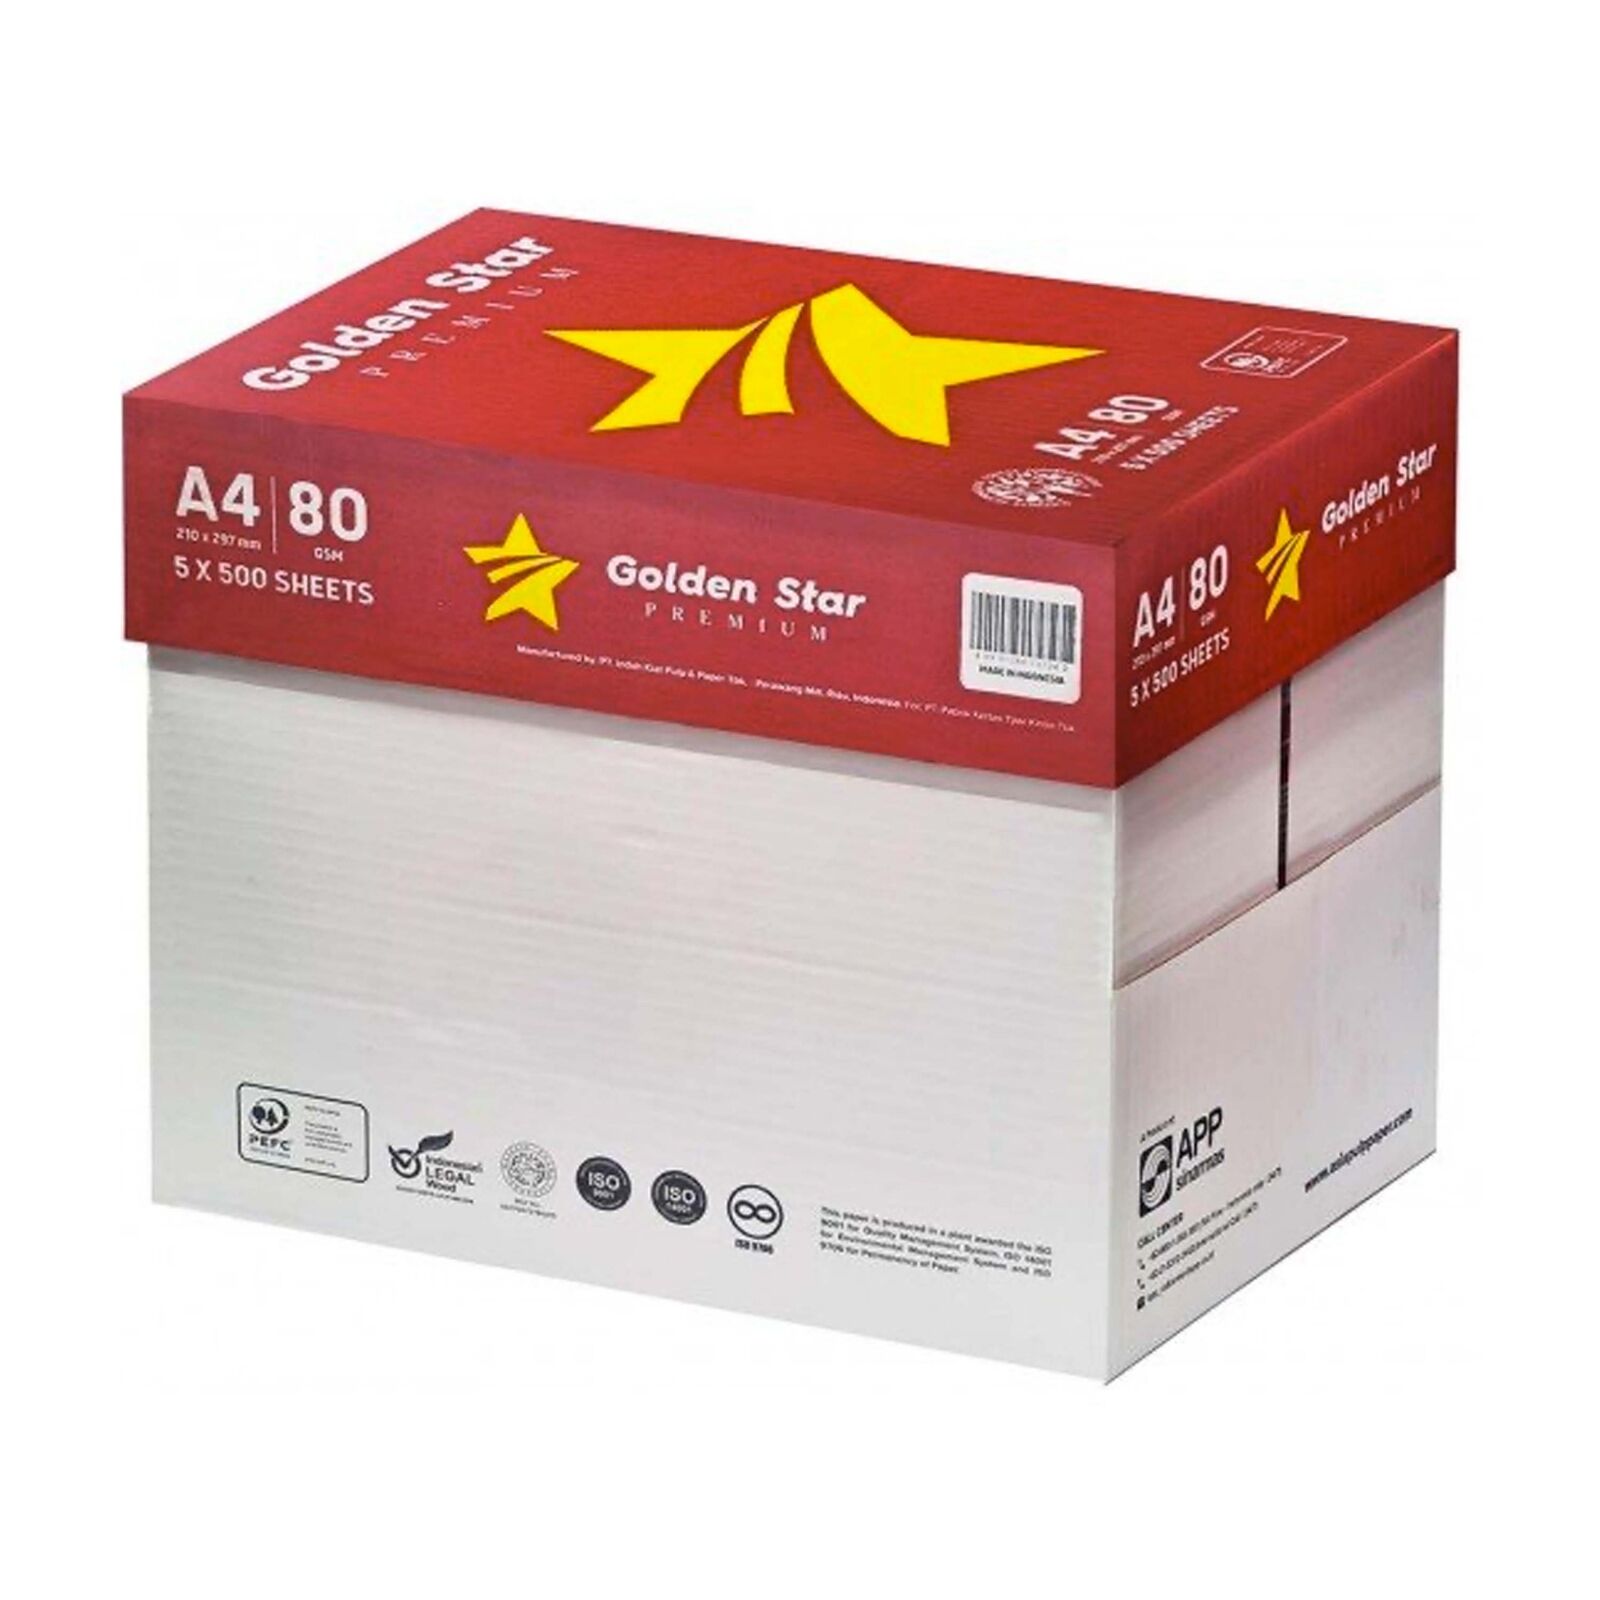 Reams Of Paper Premium 2500 Pages A4 80GR for Printer Containing Office Printers